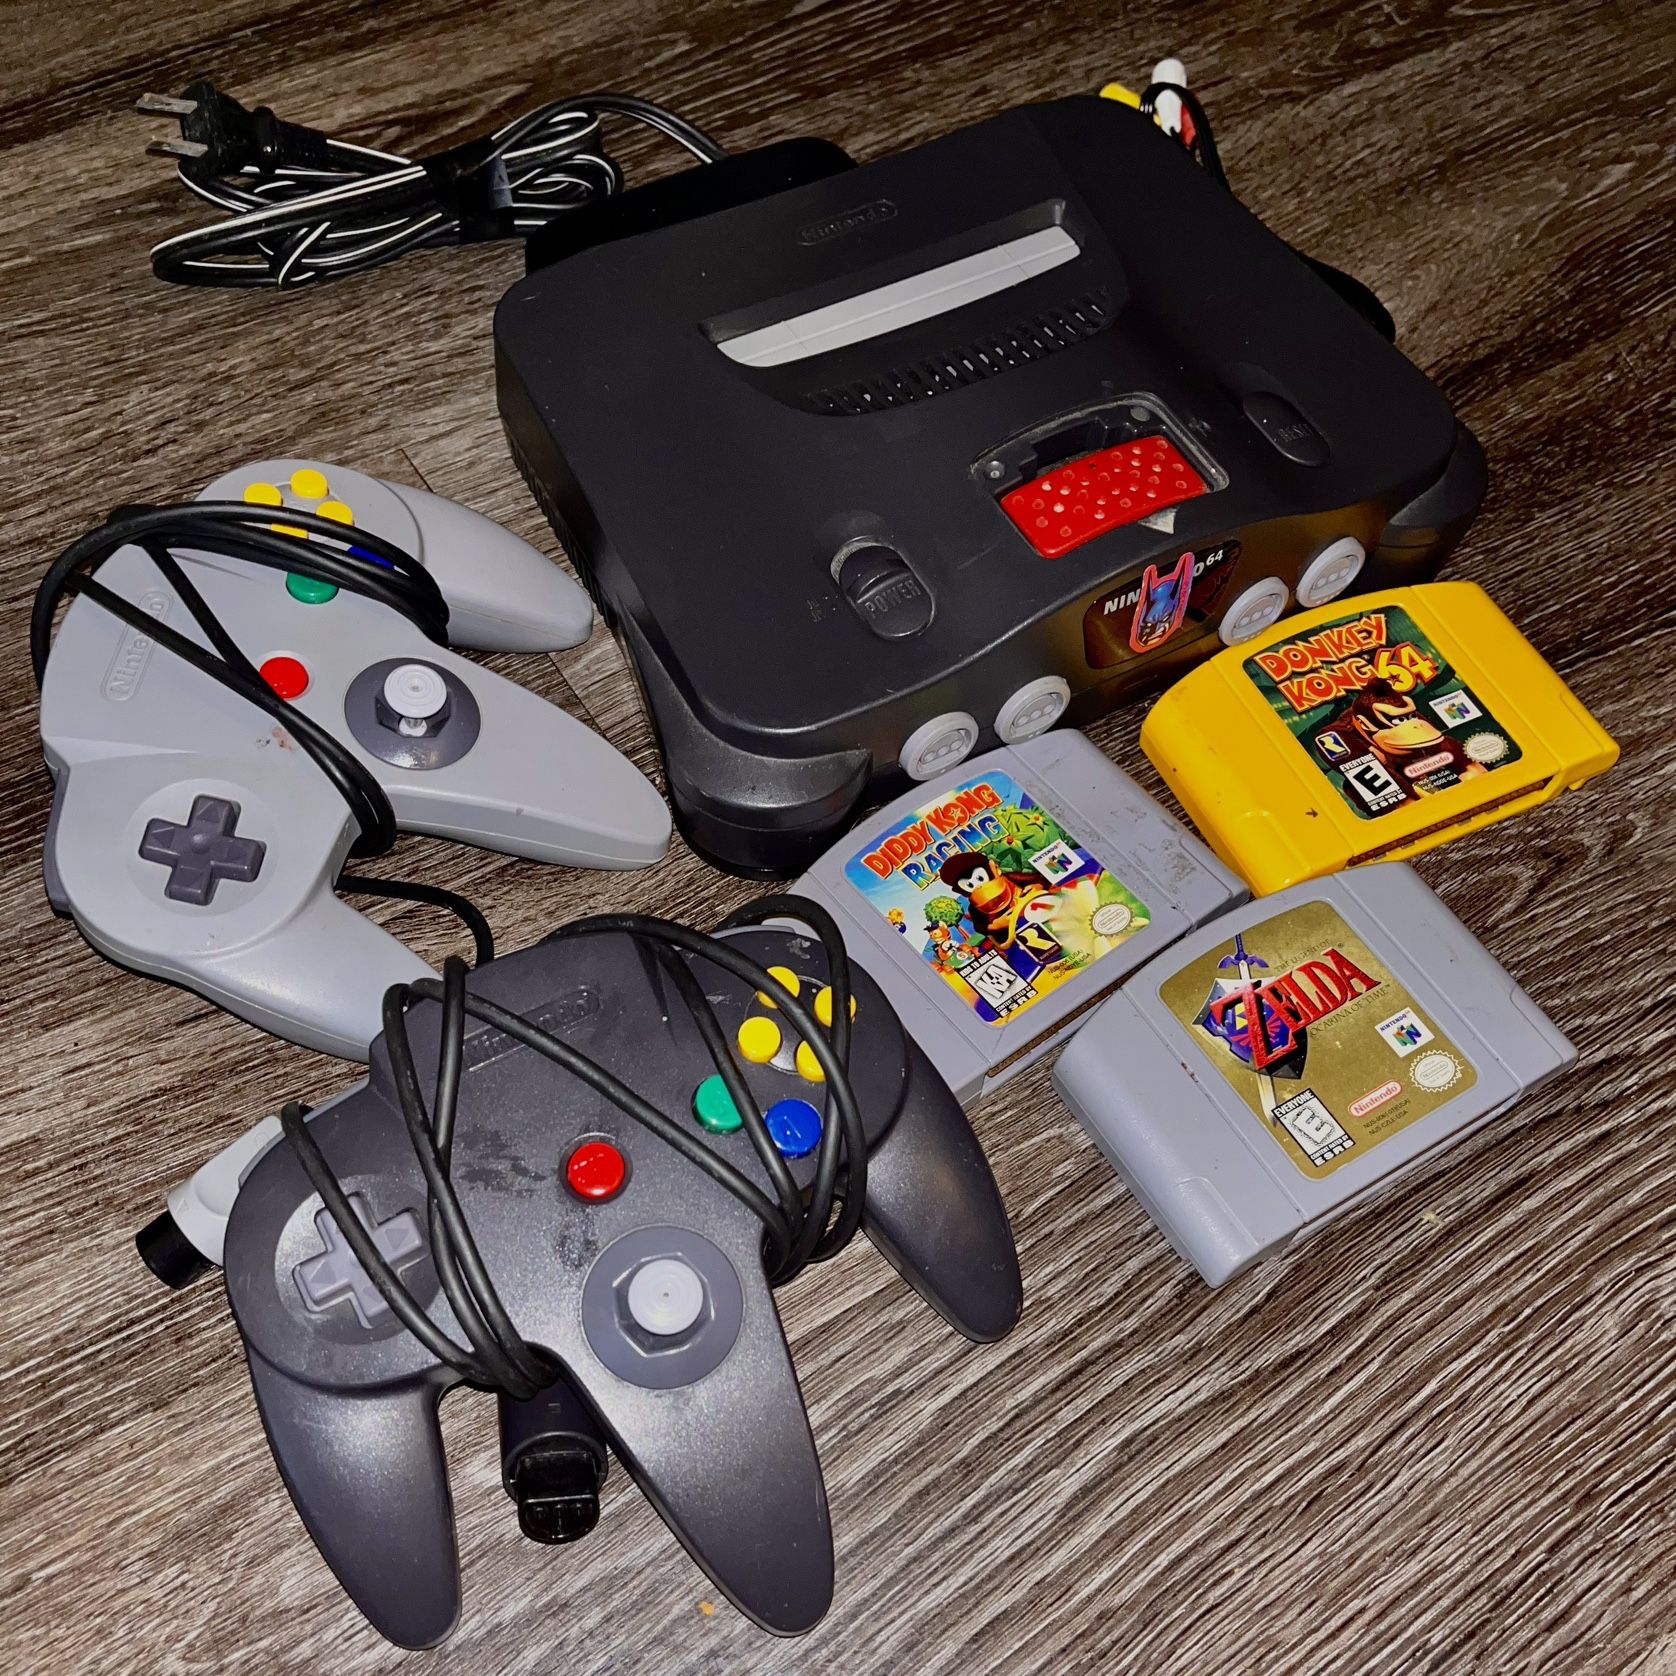 Nintendo 64 W/ Controllers, Games, And Cords For Sale Or Trade